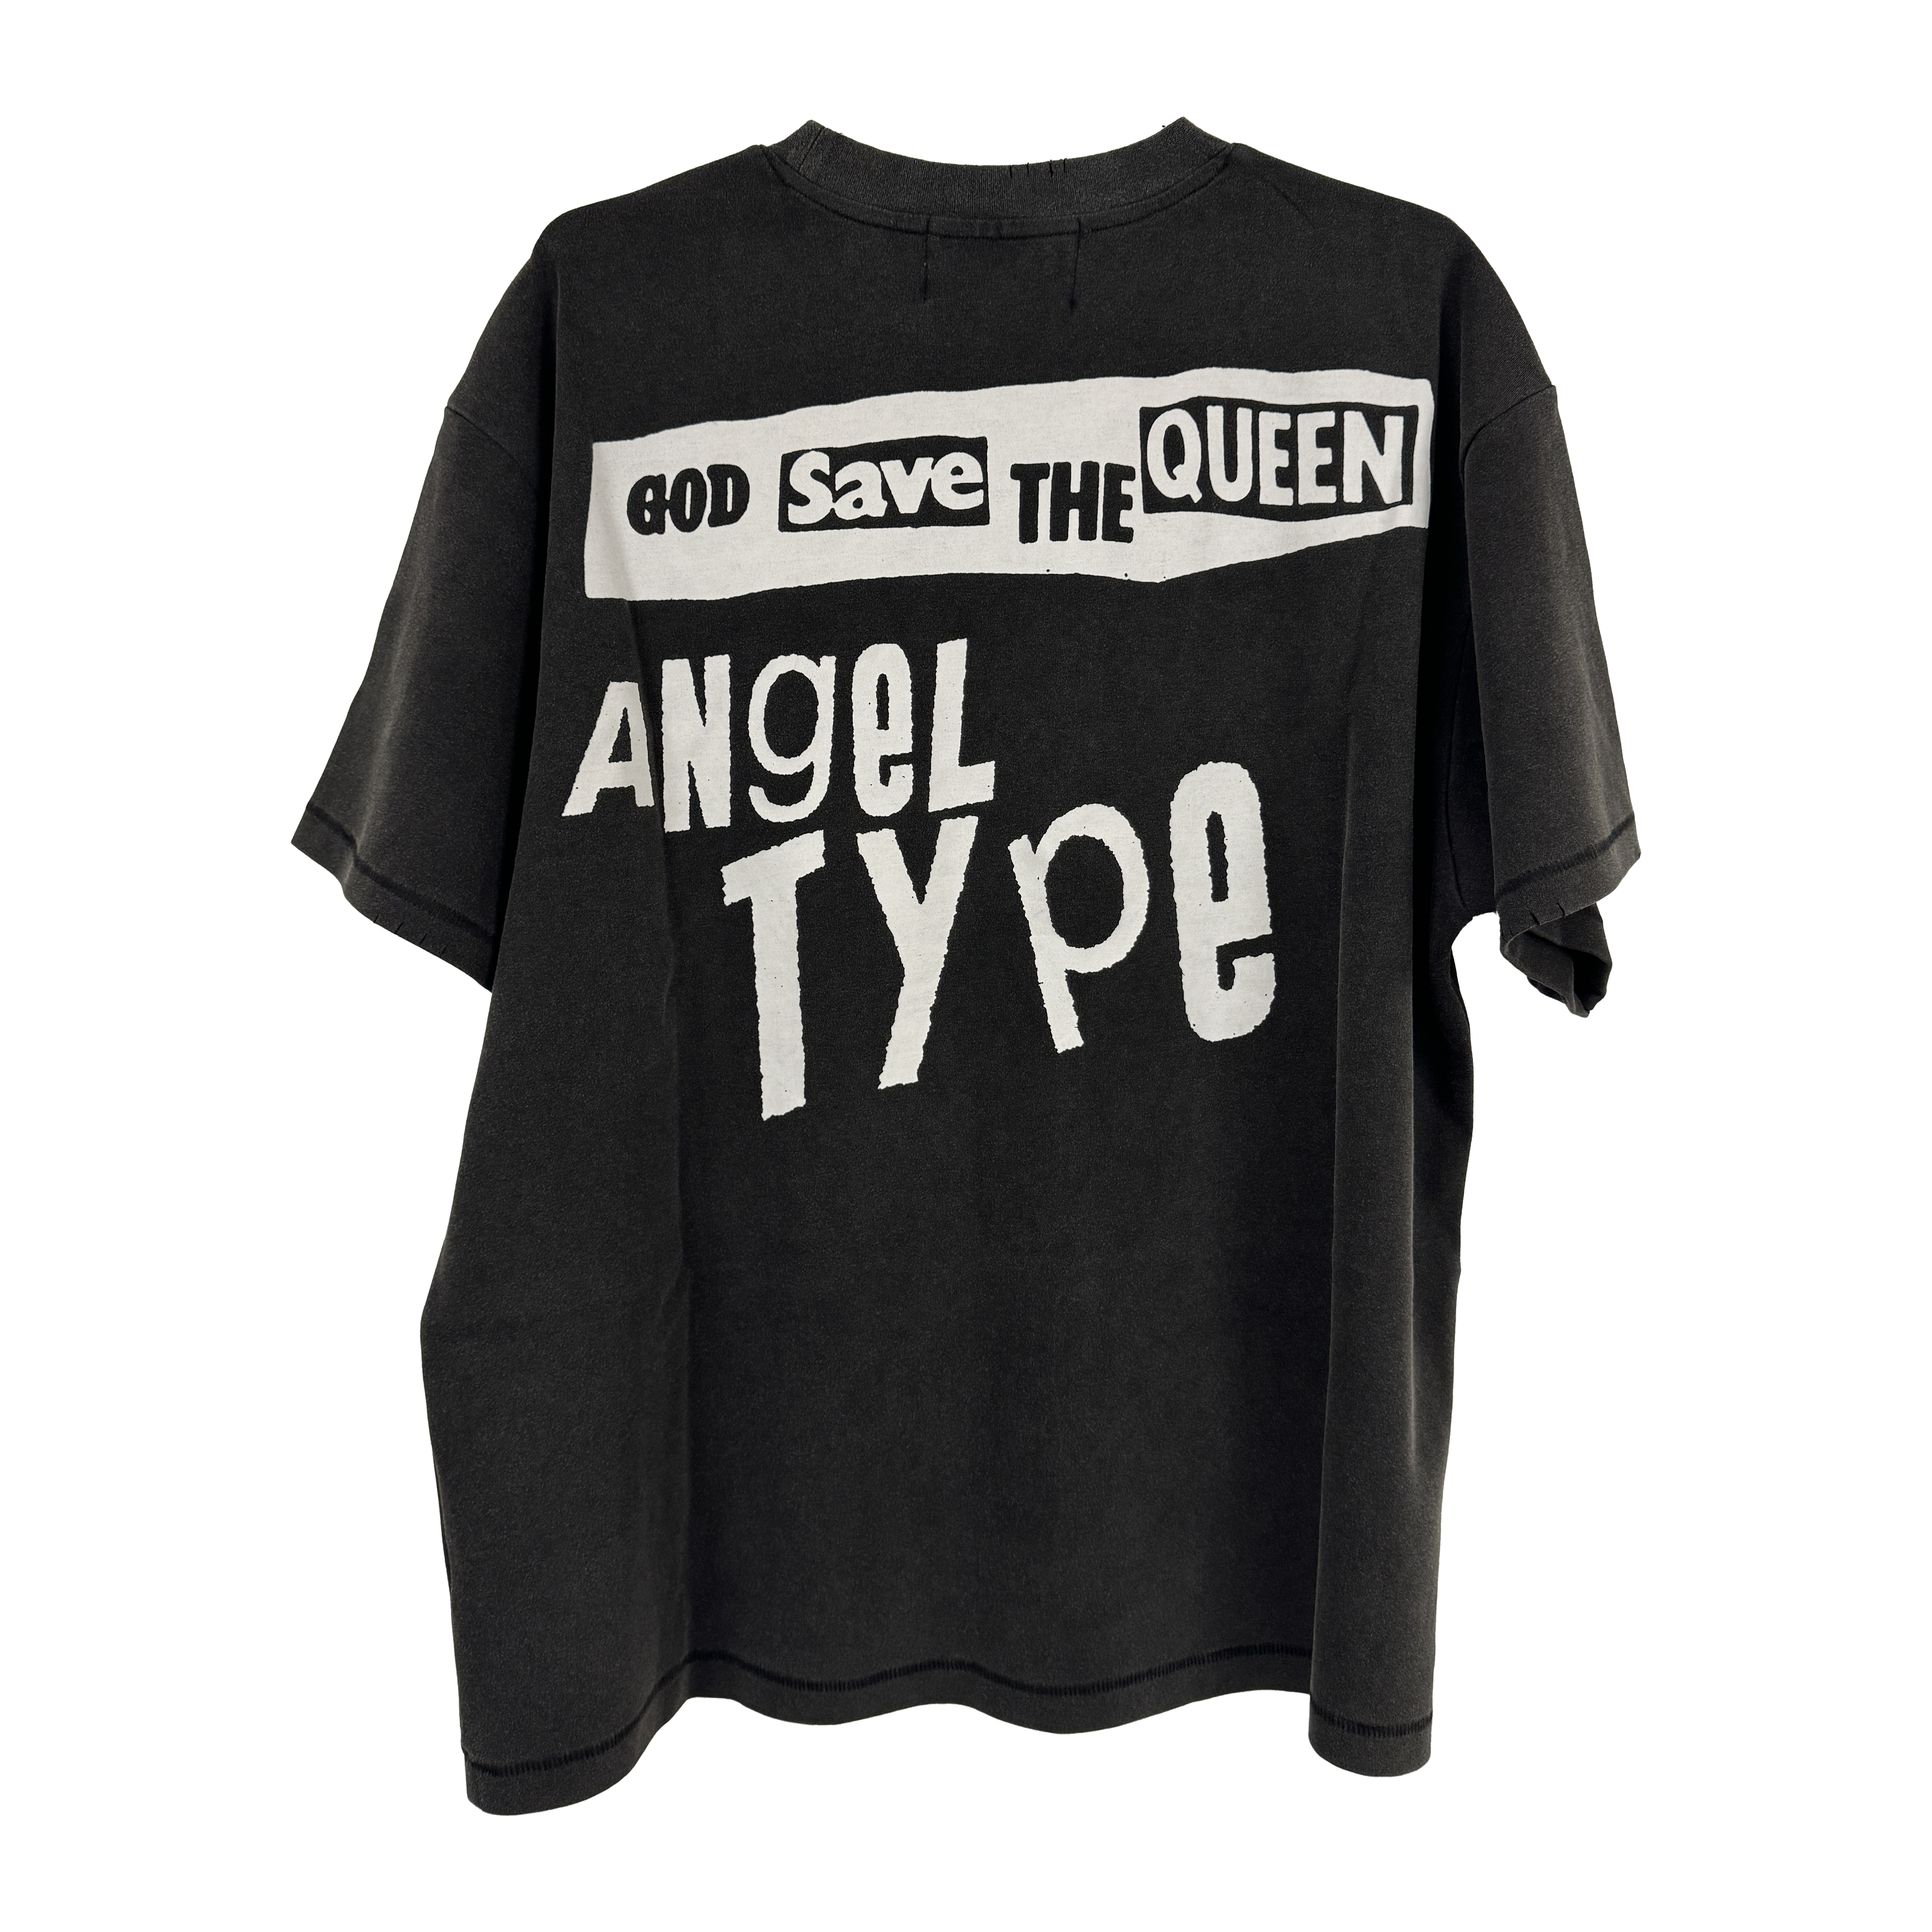 SAVE THE QUEEN TEE